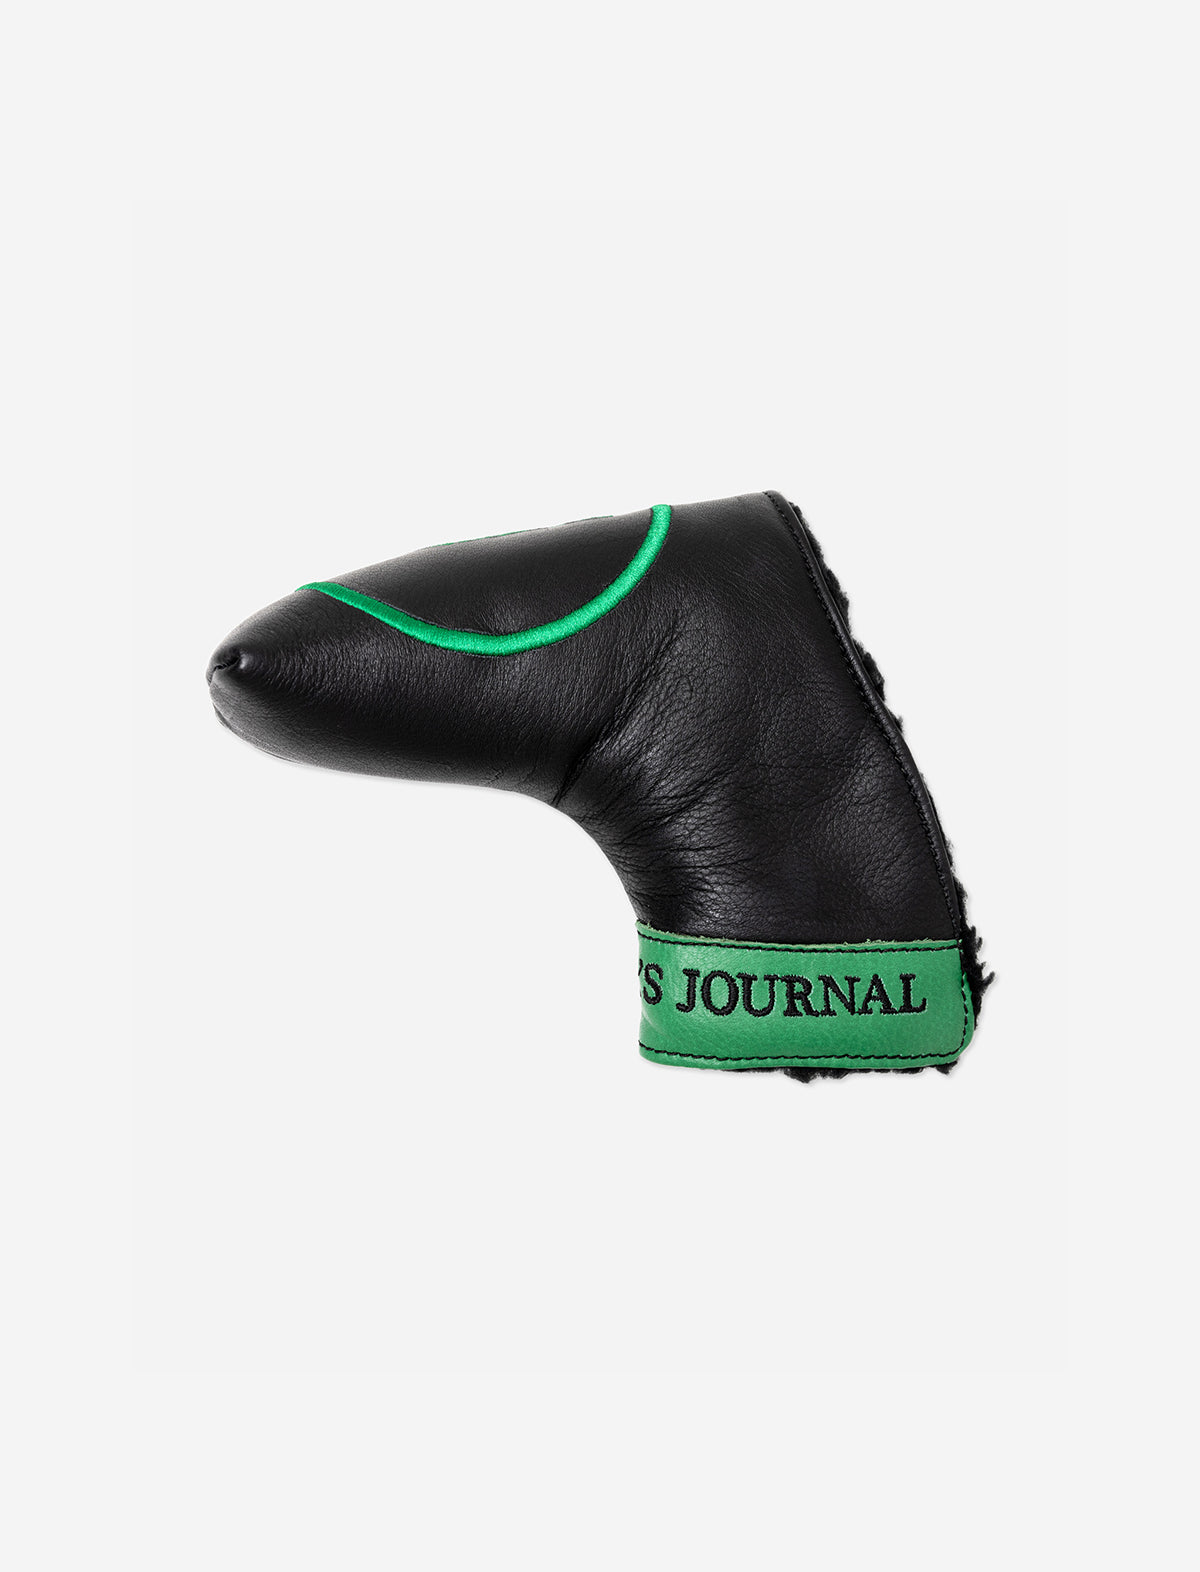 THE GOLFERS JOURNAL The Blade Putter Cover in Green